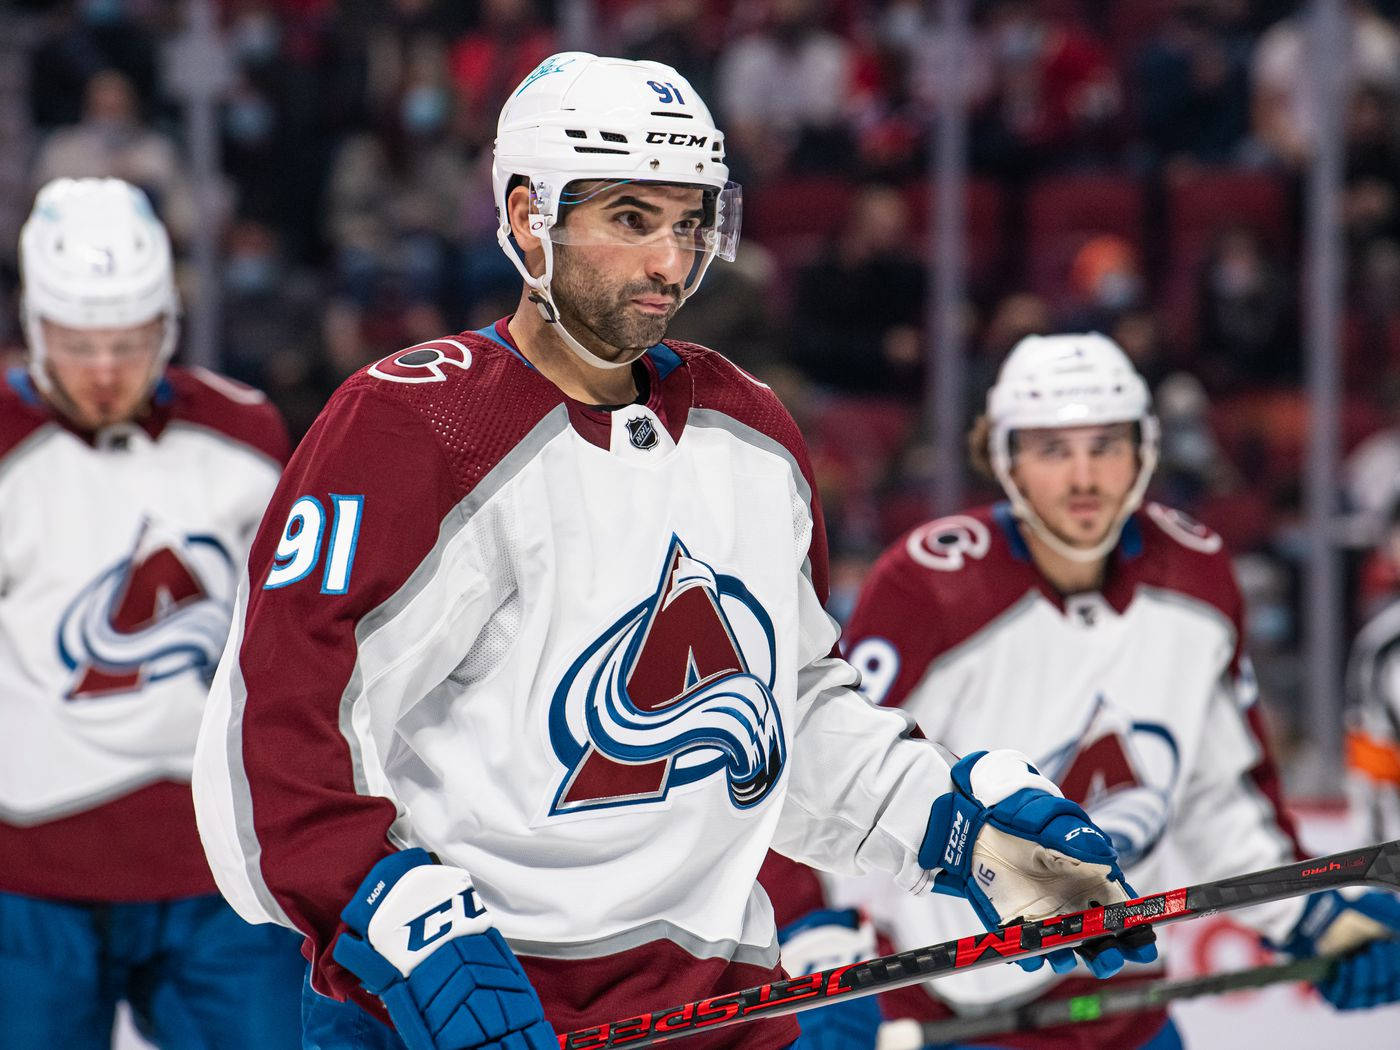 Nazem Kadri In Action With The Colorado Avalanche Wallpaper